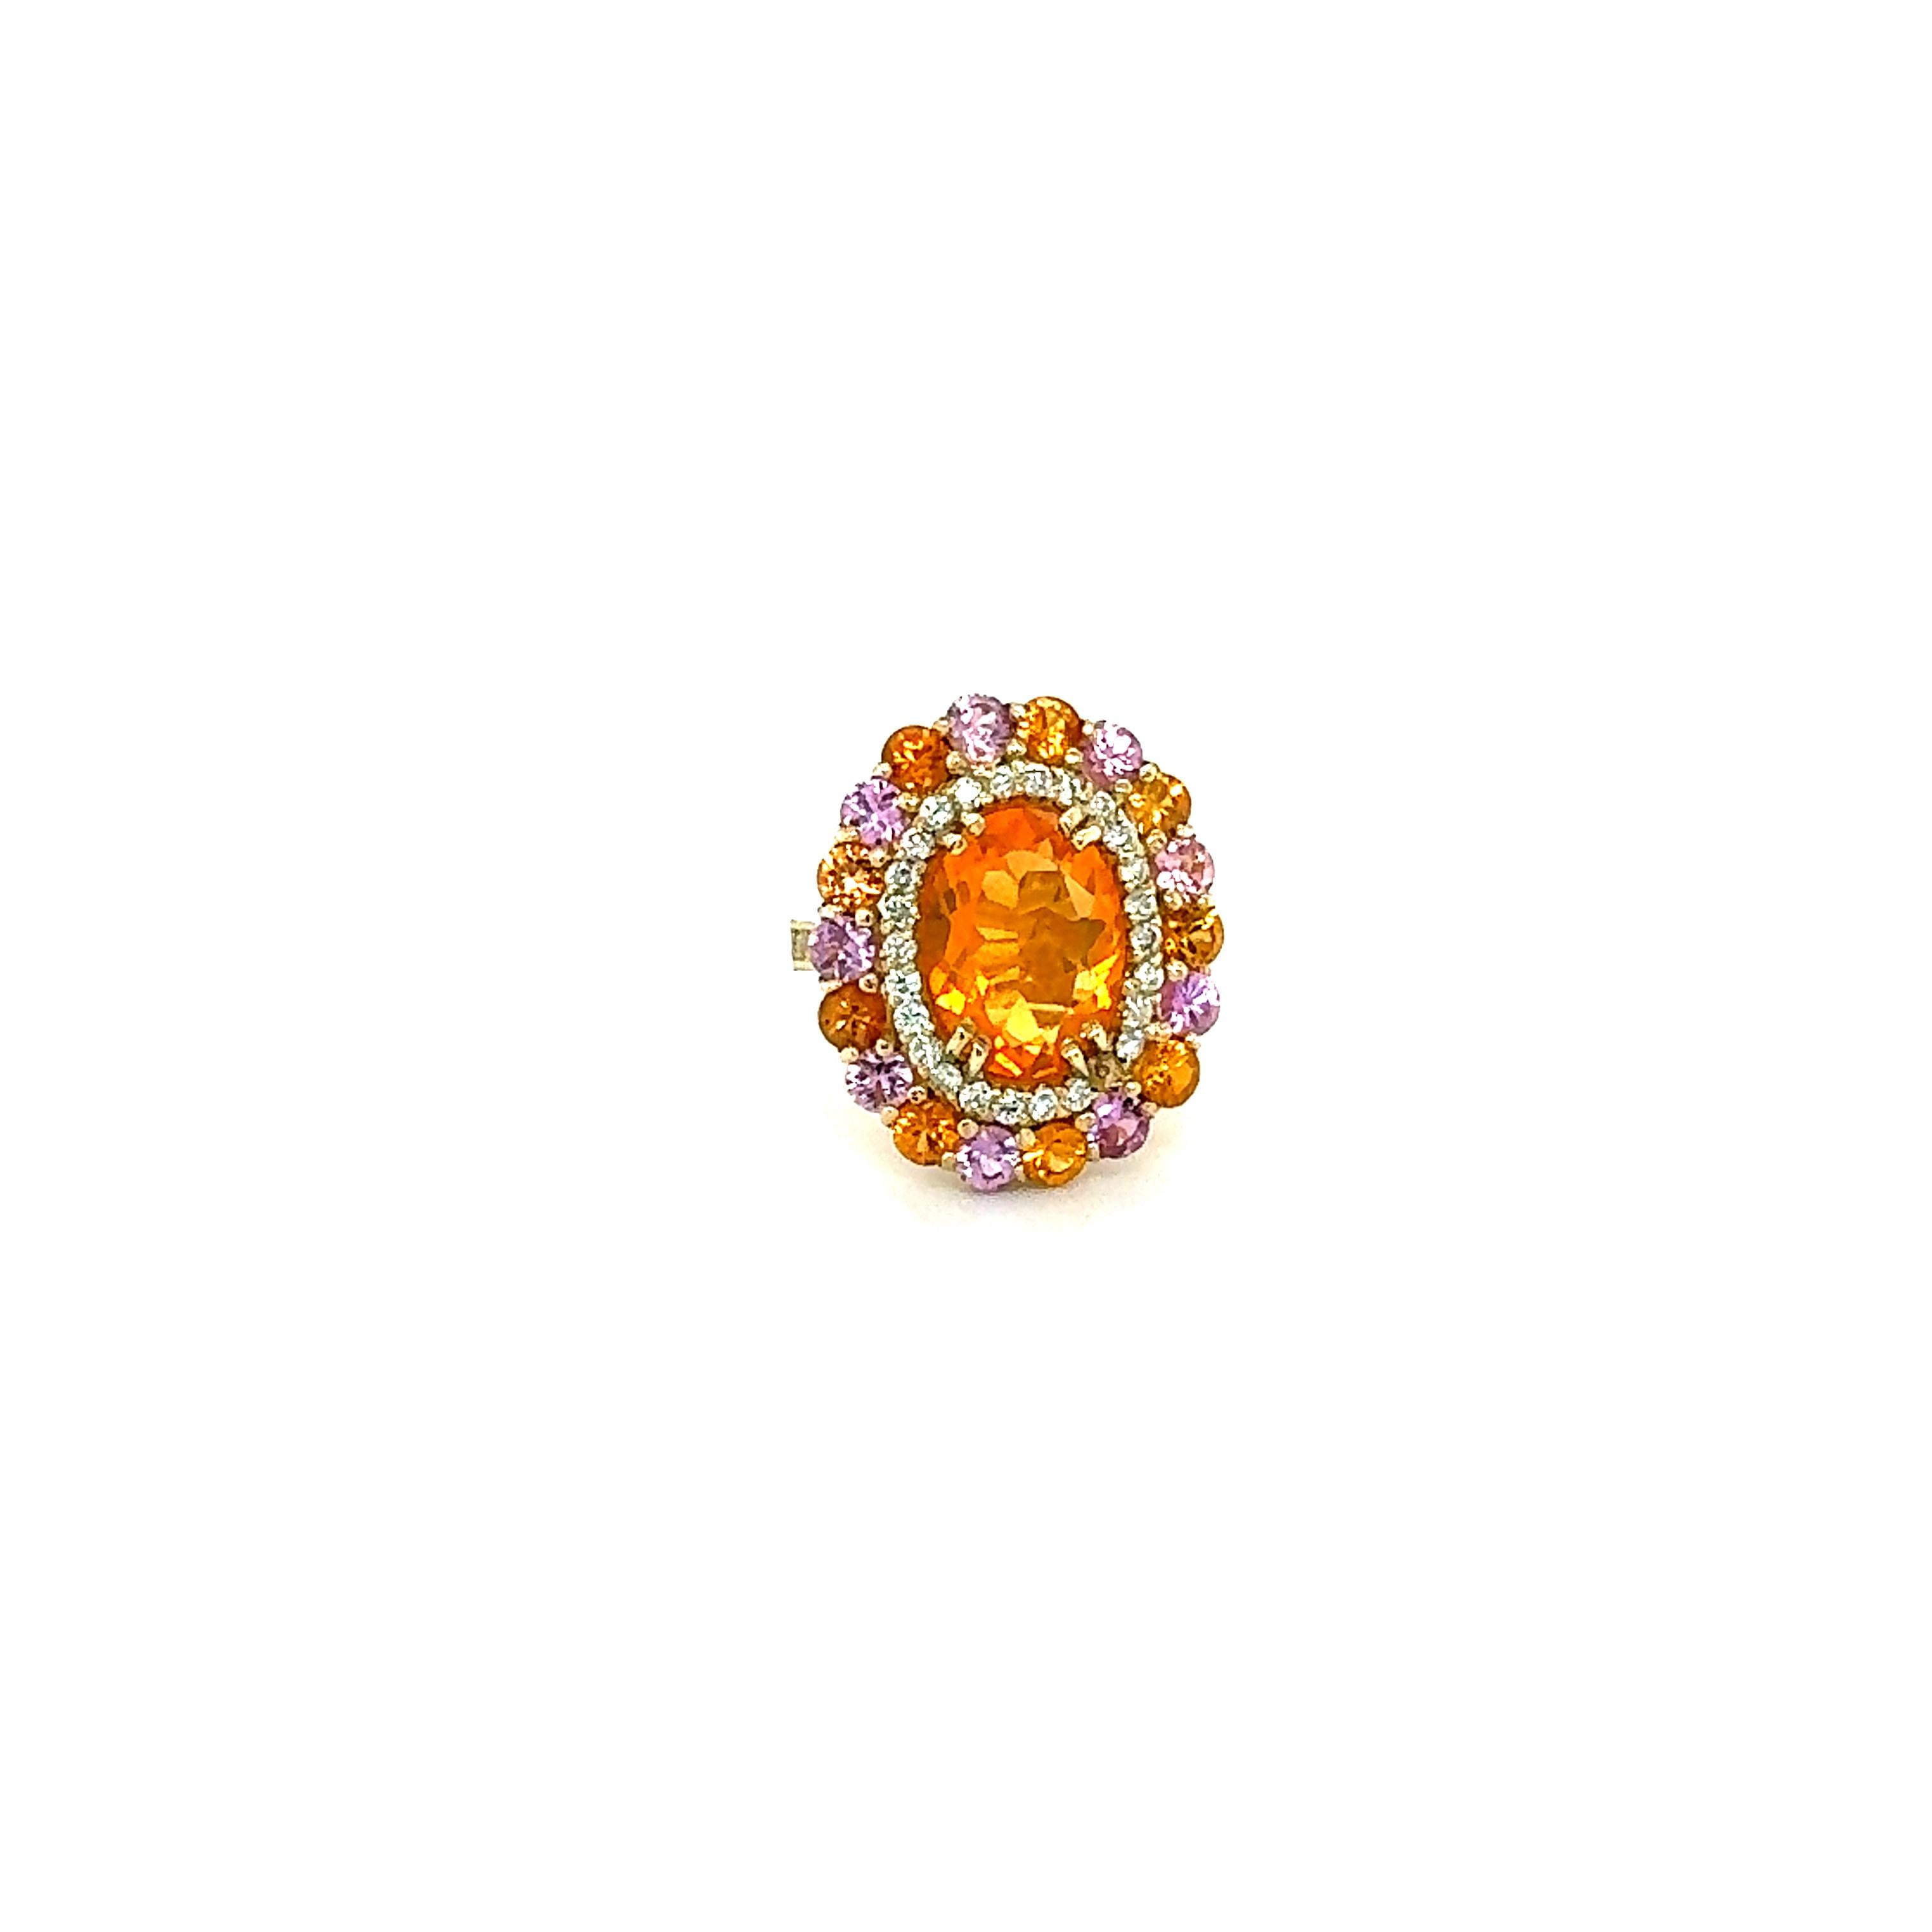 6.93 Carat Natural Fire Opal Sapphire and Diamond Yellow Gold Cocktail Ring

Super gorgeous and uniquely designed 6.93 Carat Fire Opal and Multi-Colored Sapphire and Diamond Yellow Gold Cocktail Ring!
This design is a customer favorite, and we can't